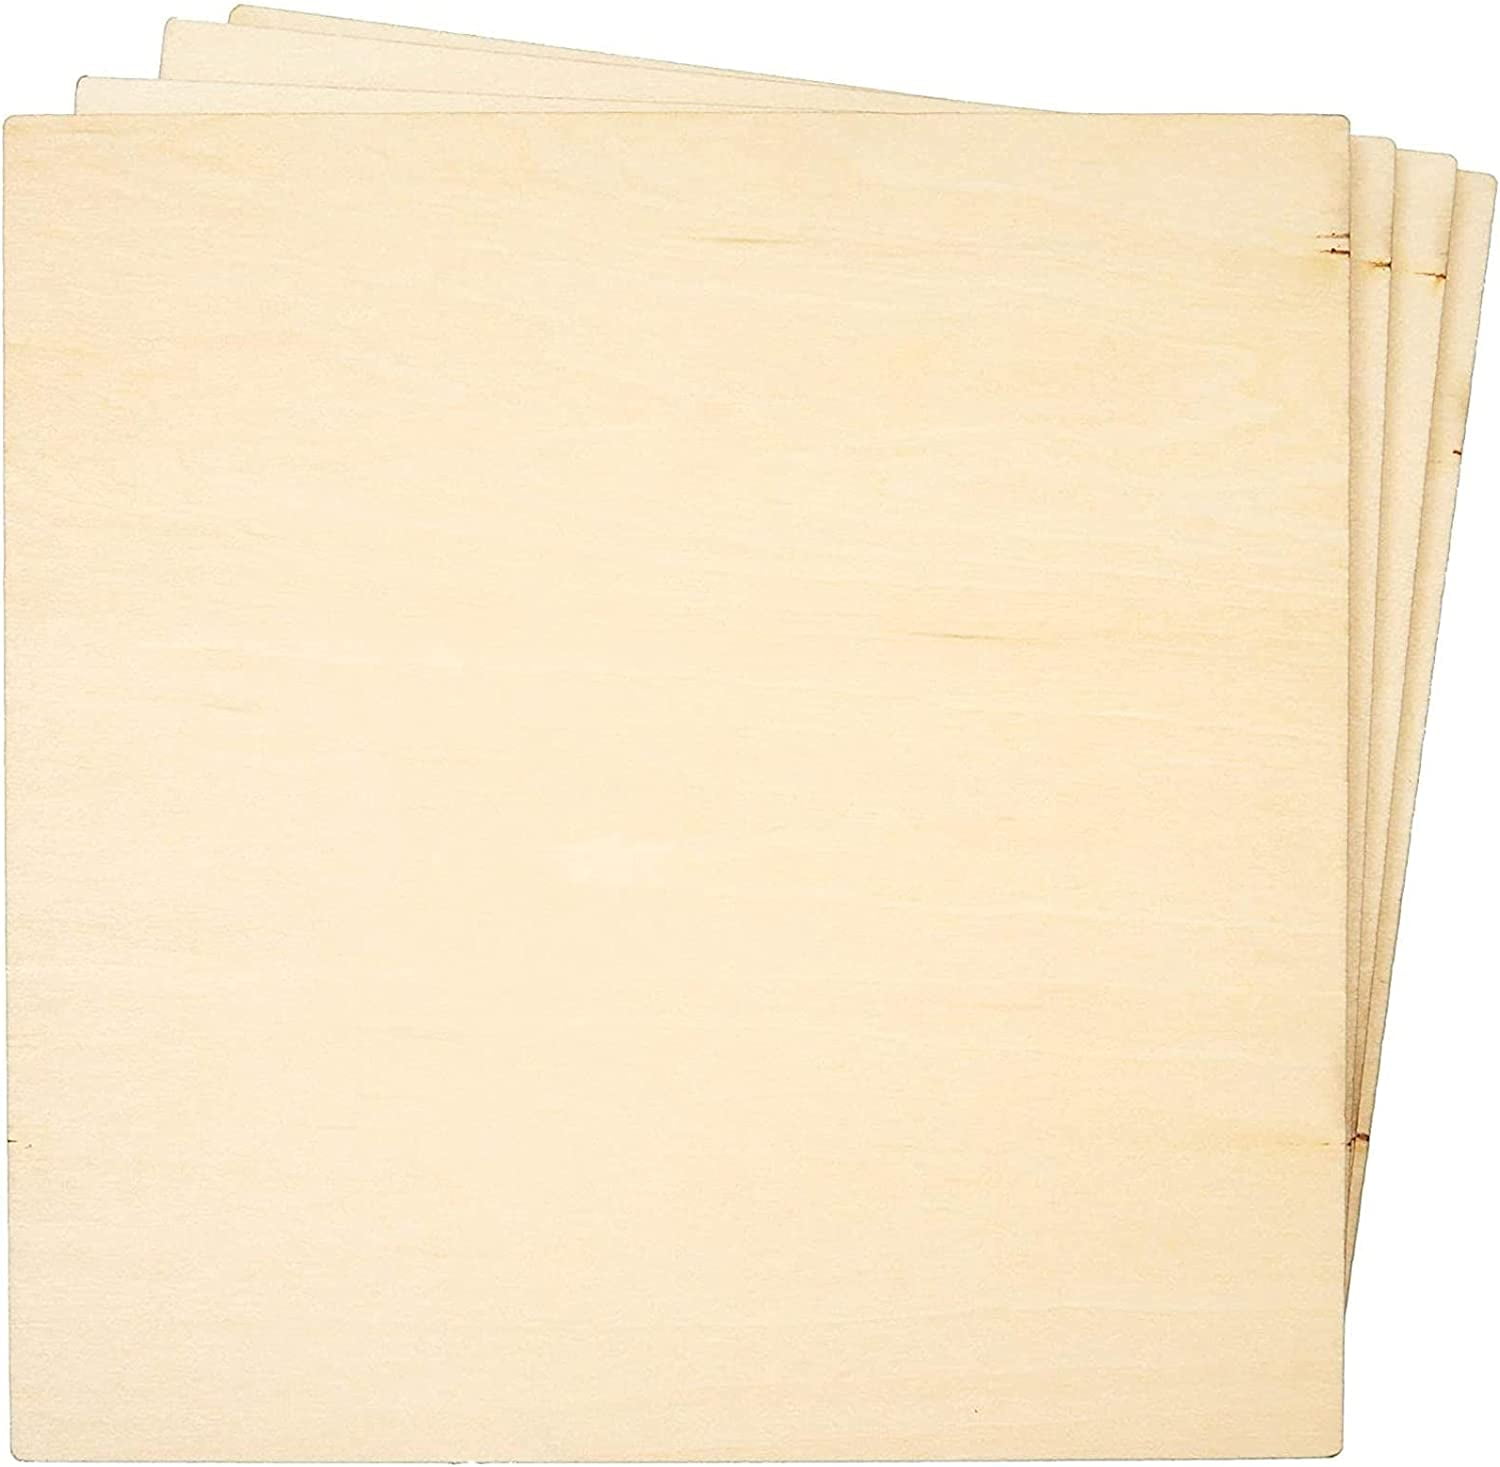 Thin Wood Sheets for Crafts, Wood Burning, Basswood Plywood (6 x 6 x 1 –  BrightCreationsOfficial